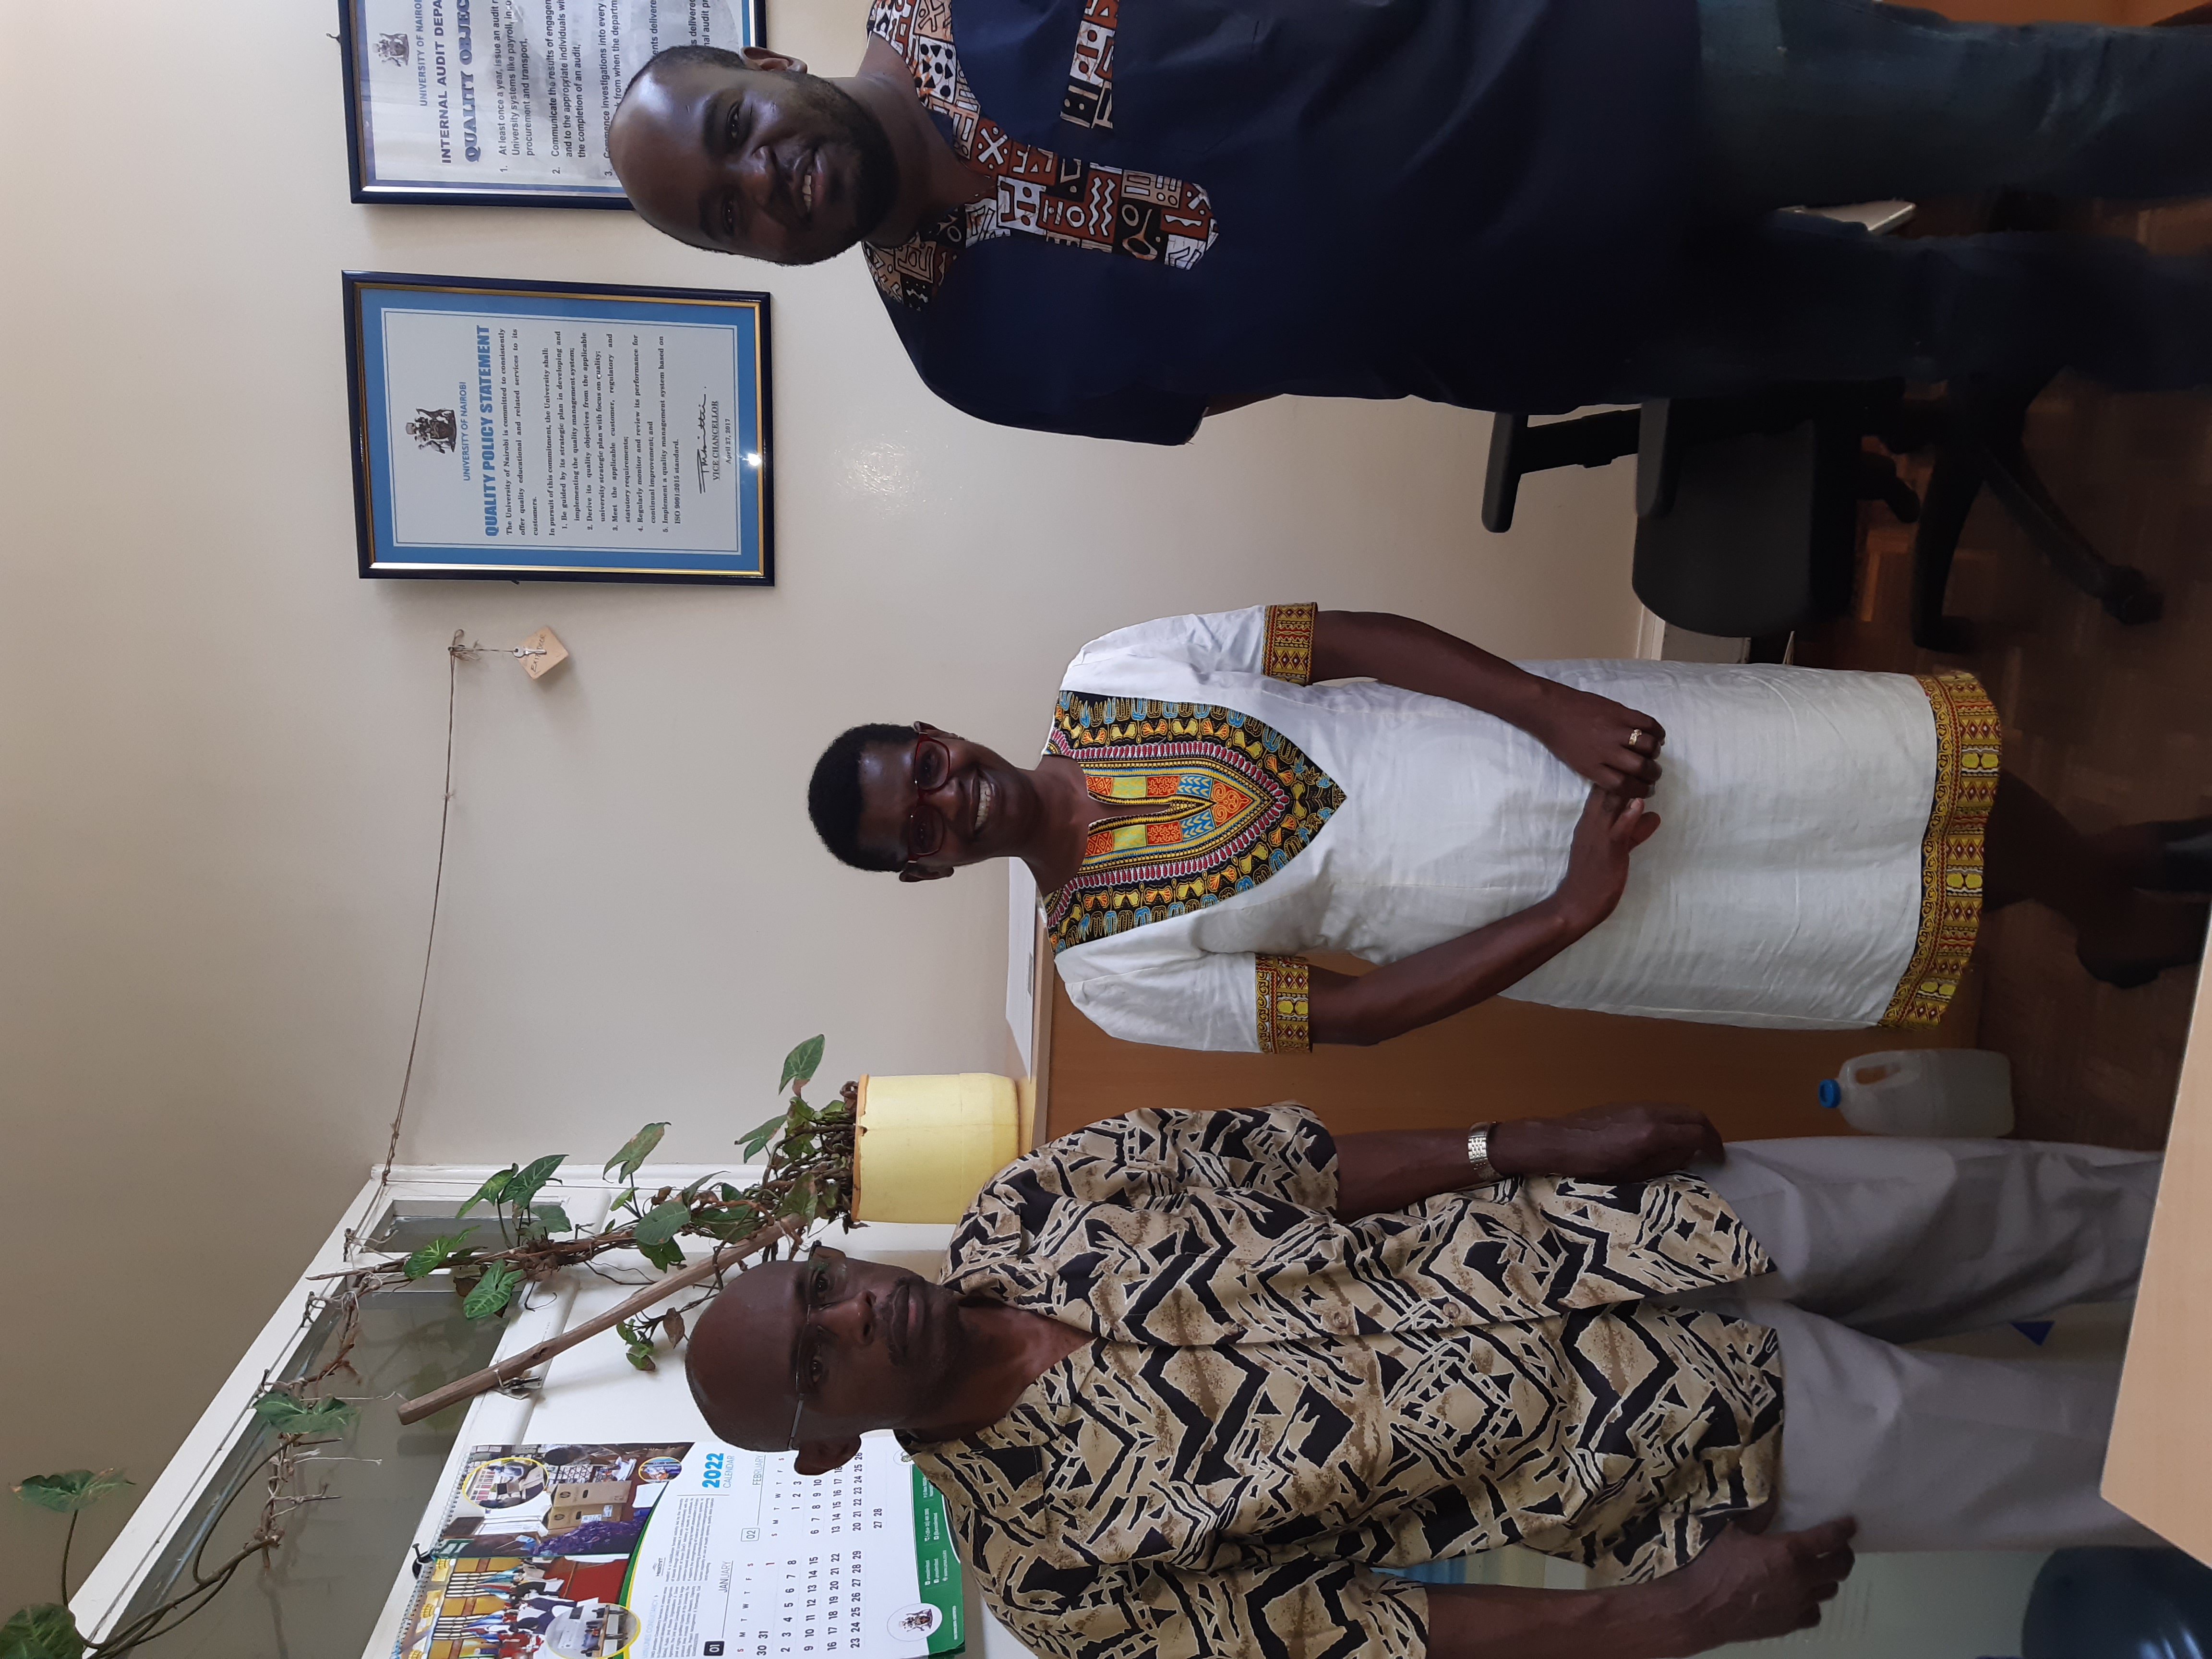 Ms Anna, Mr Manono and Mr Langi posing for a photo in African attire